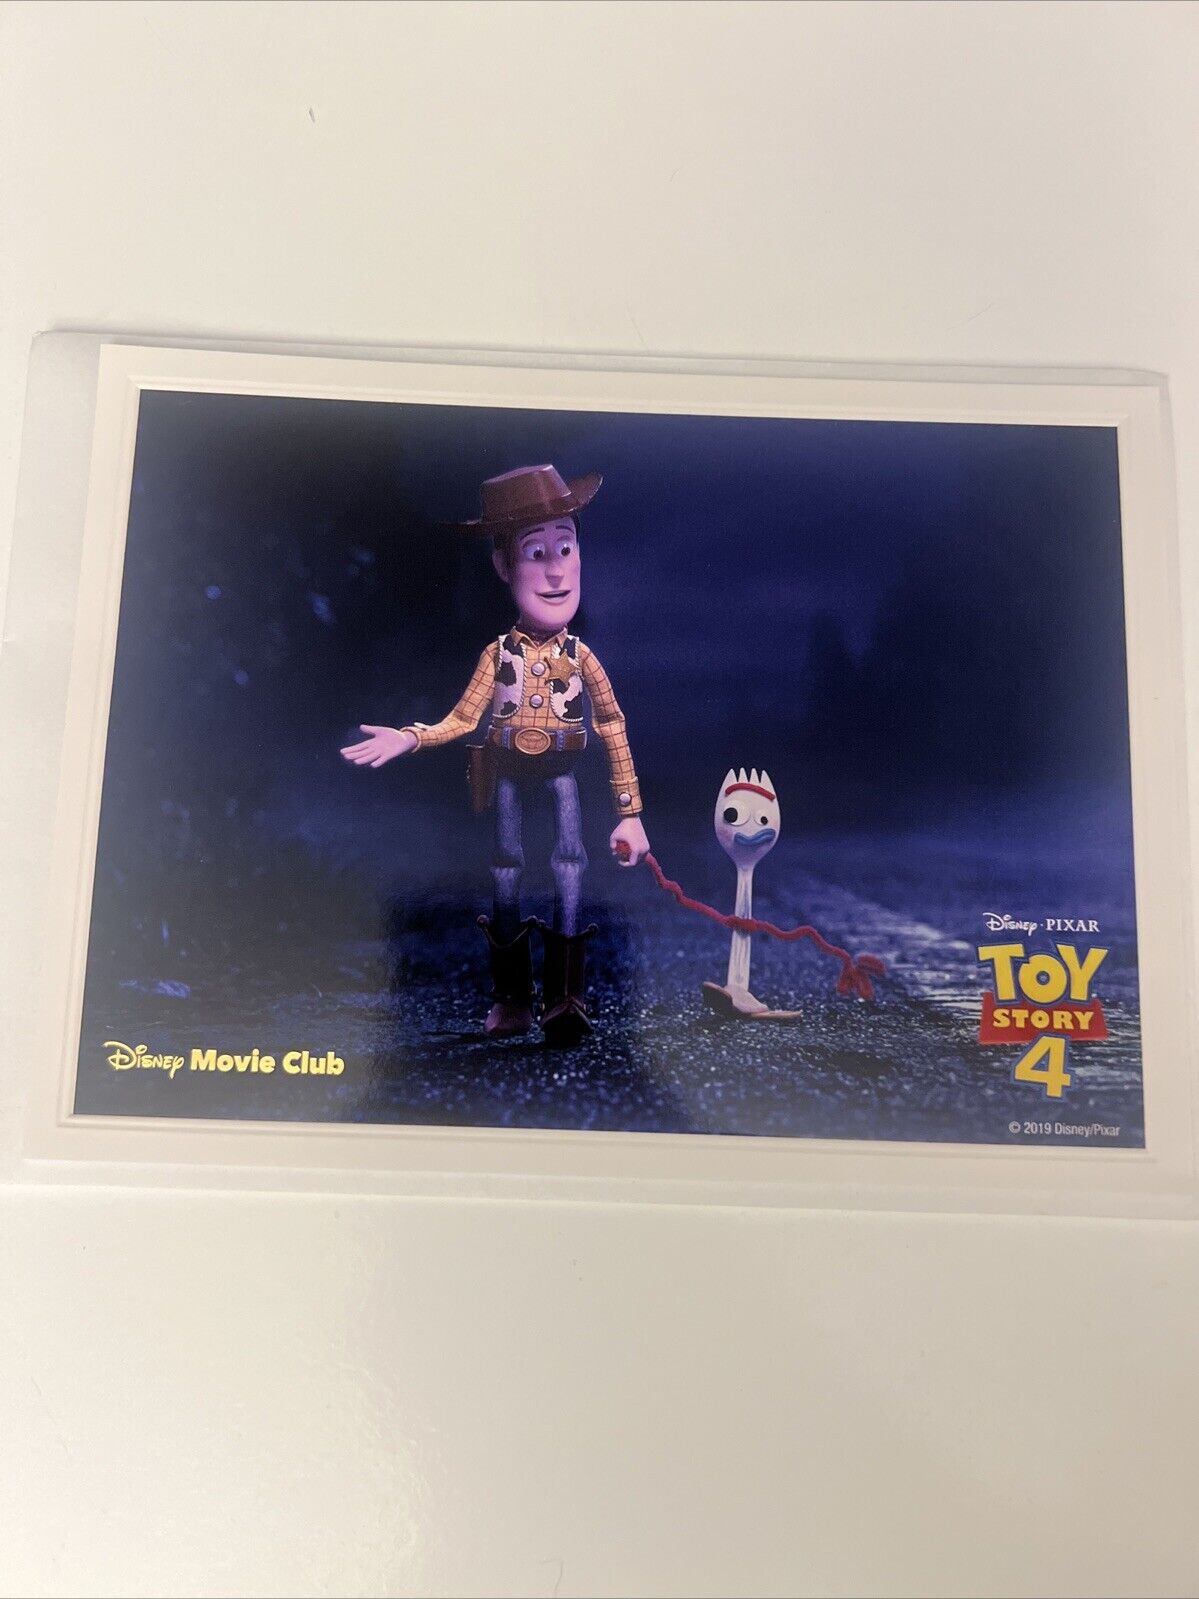 Disney Movie Club Exclusive 5 x 7 Lithographs - Toy Store 4 - Woody and Forky